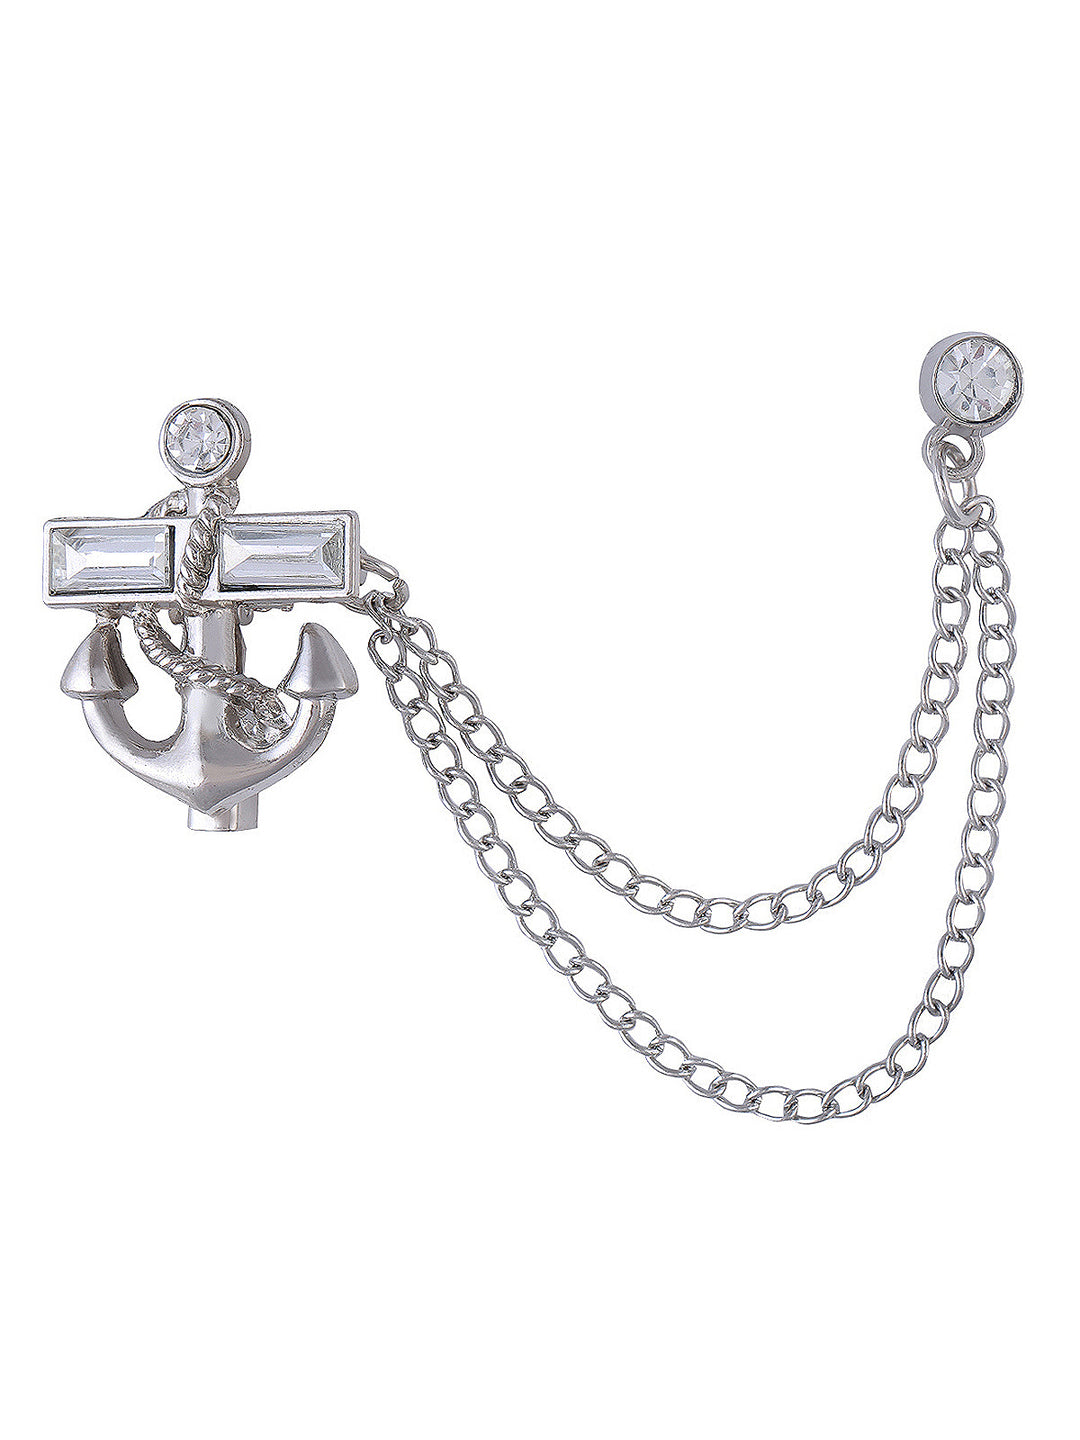 Classic Unisex Anchor with Chain Fashion Silver Color Brooch